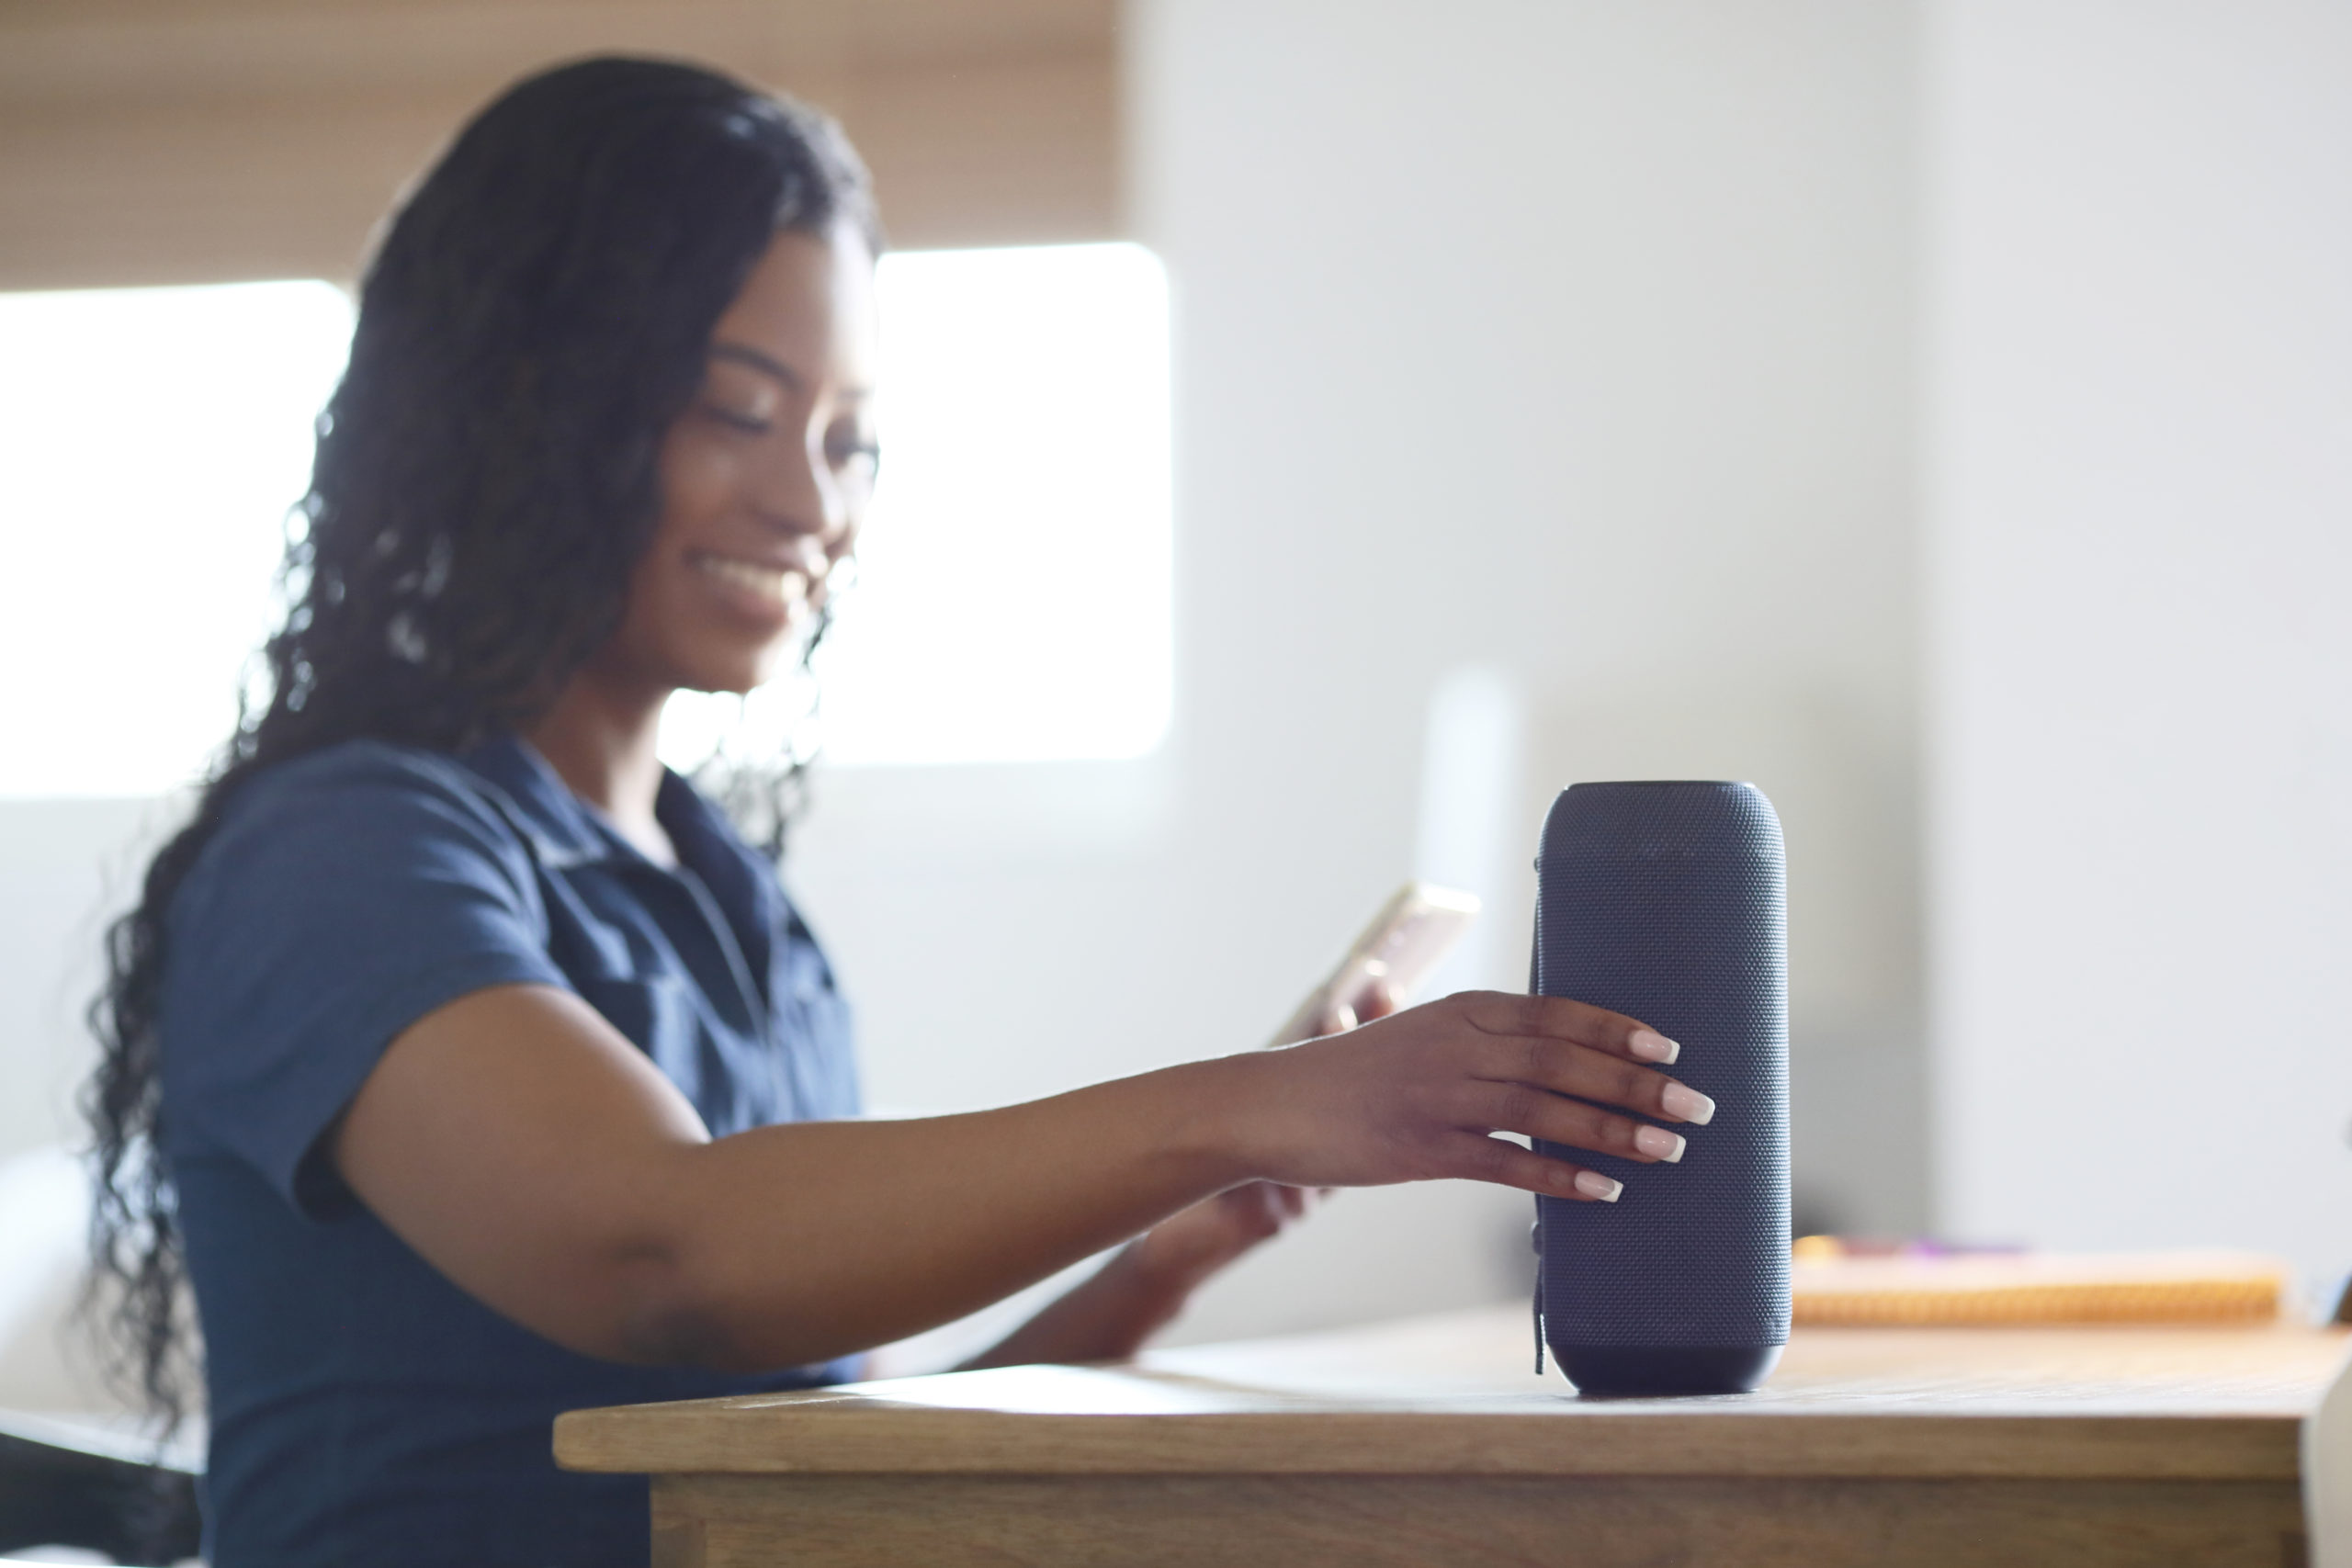 An African American millennial woman with long hair, sits at a wooden table while setting up a wireless speaker with her cell phone.